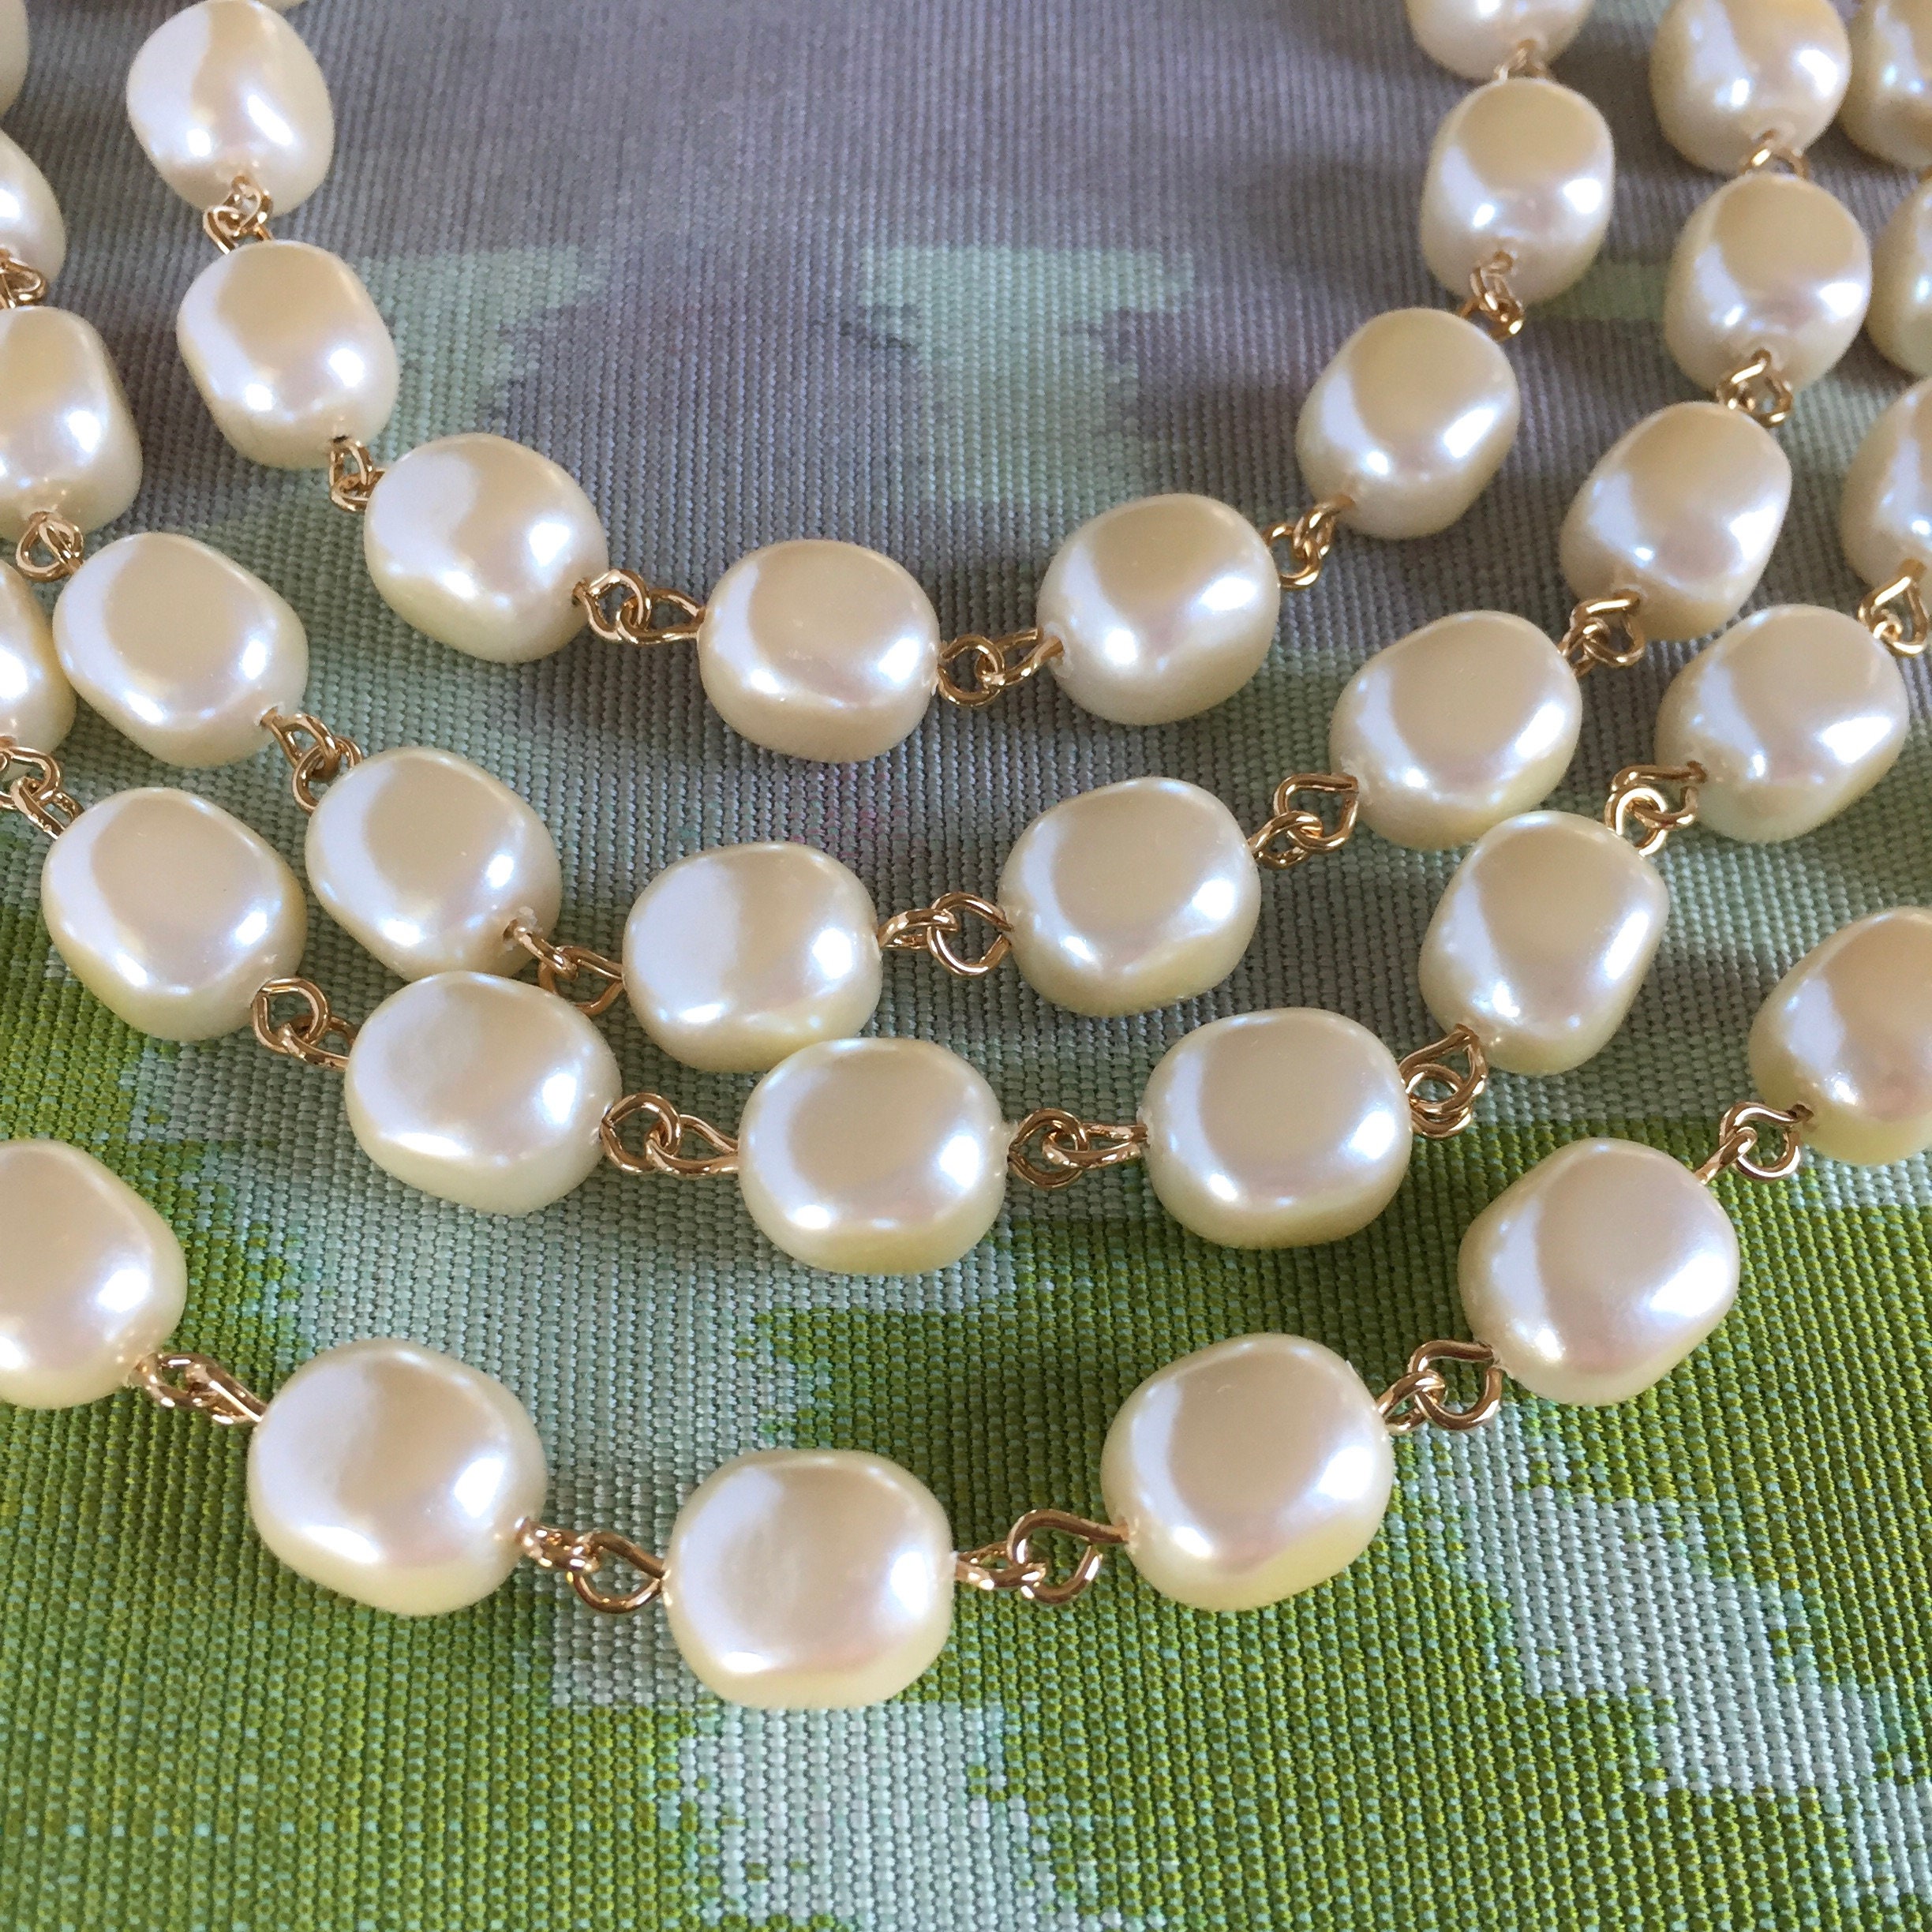 Vintage Faux Baroque Pearls Cream Colored Pearl Chain 9mm 